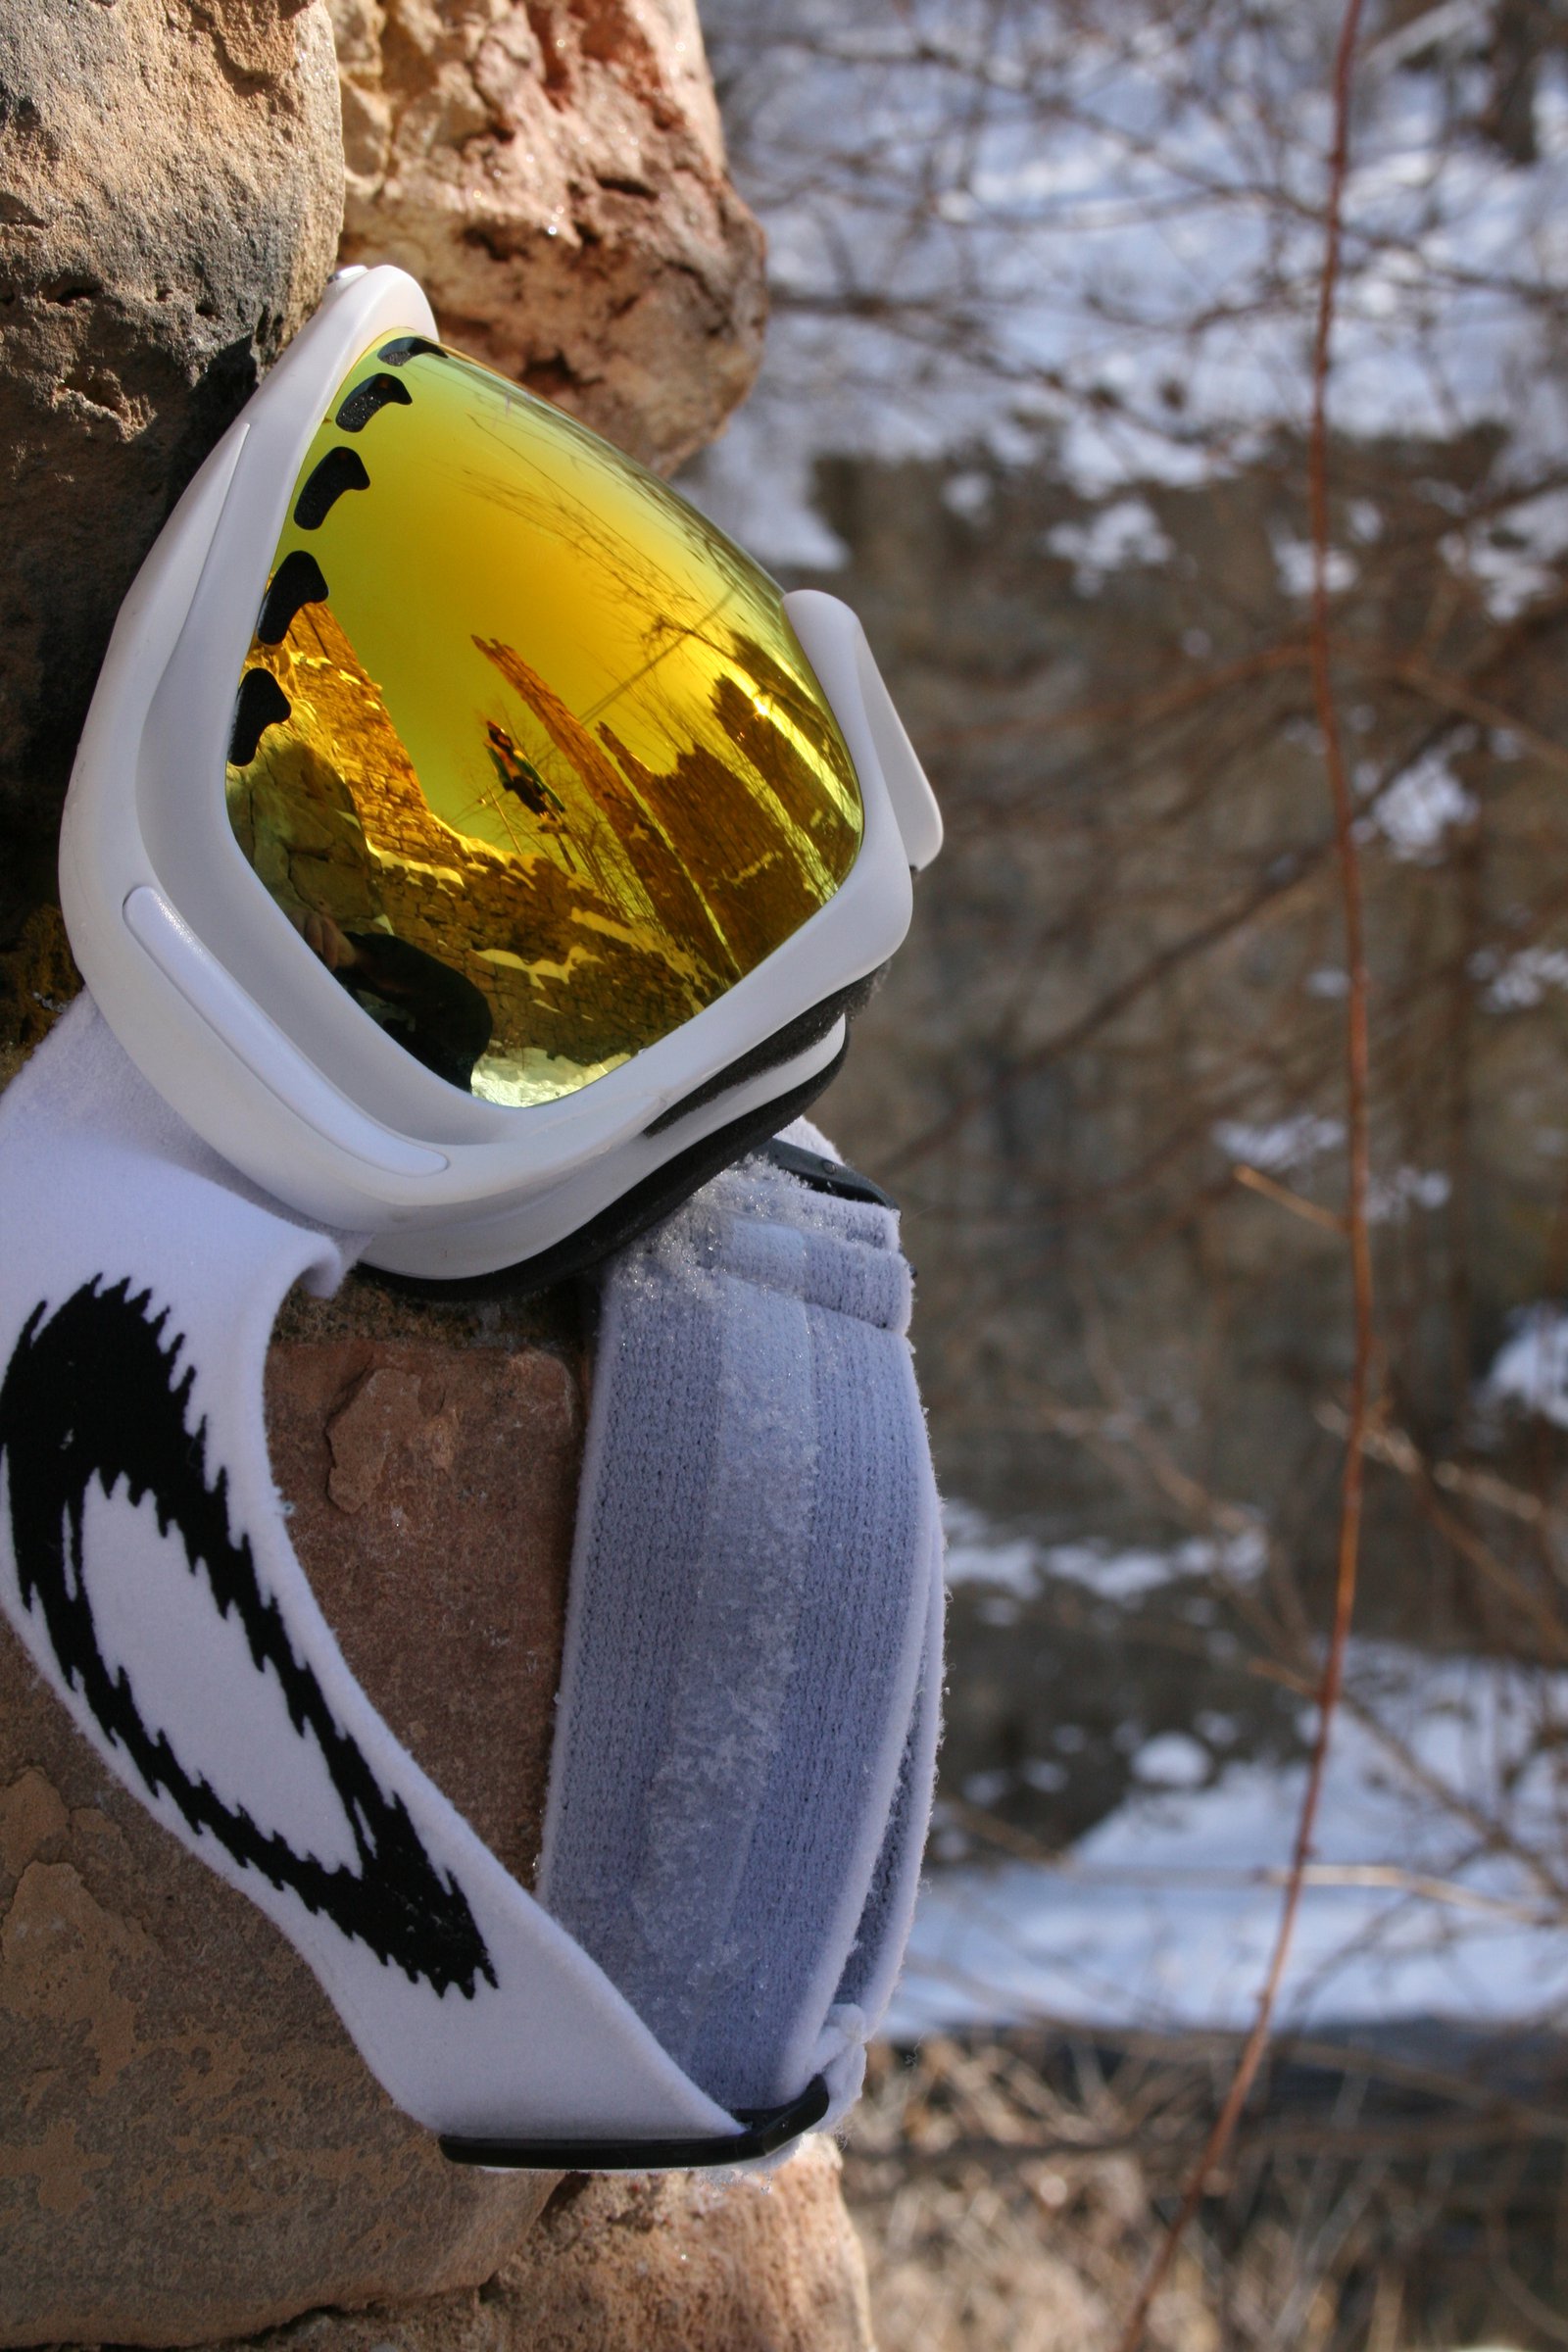 Another Goggle Shot